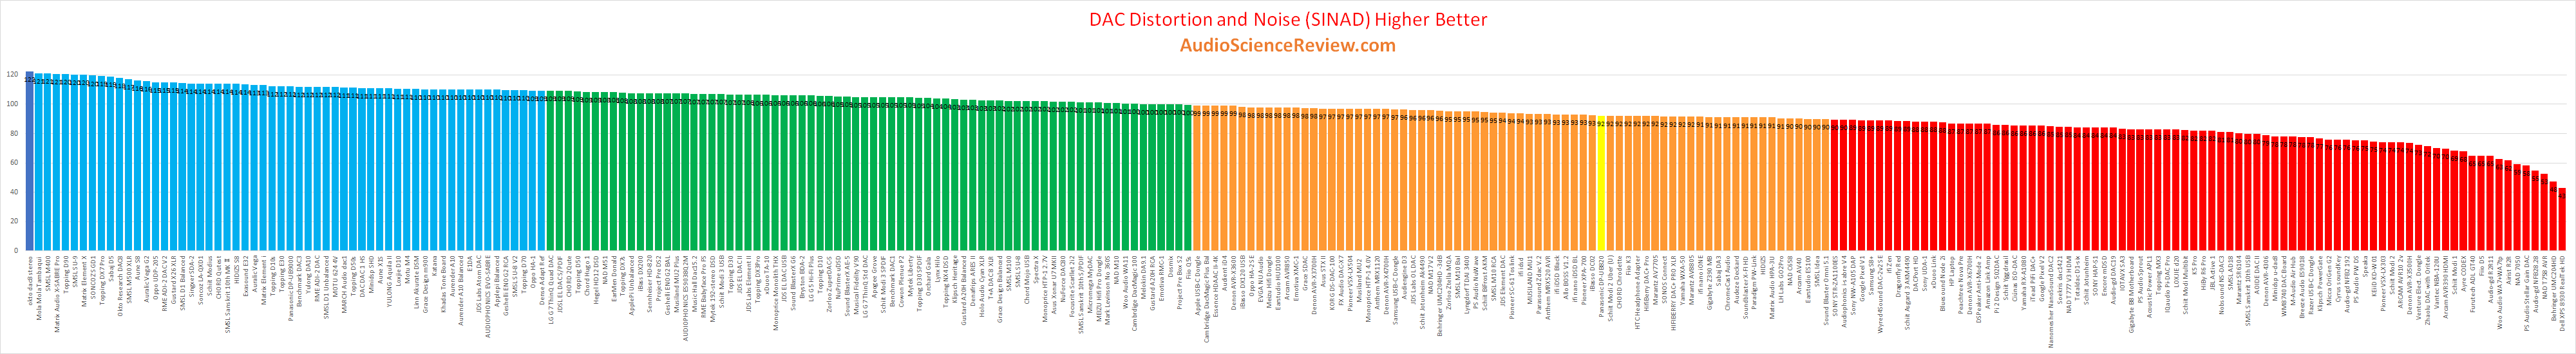 Best UHD Player Audio Review 2020.png